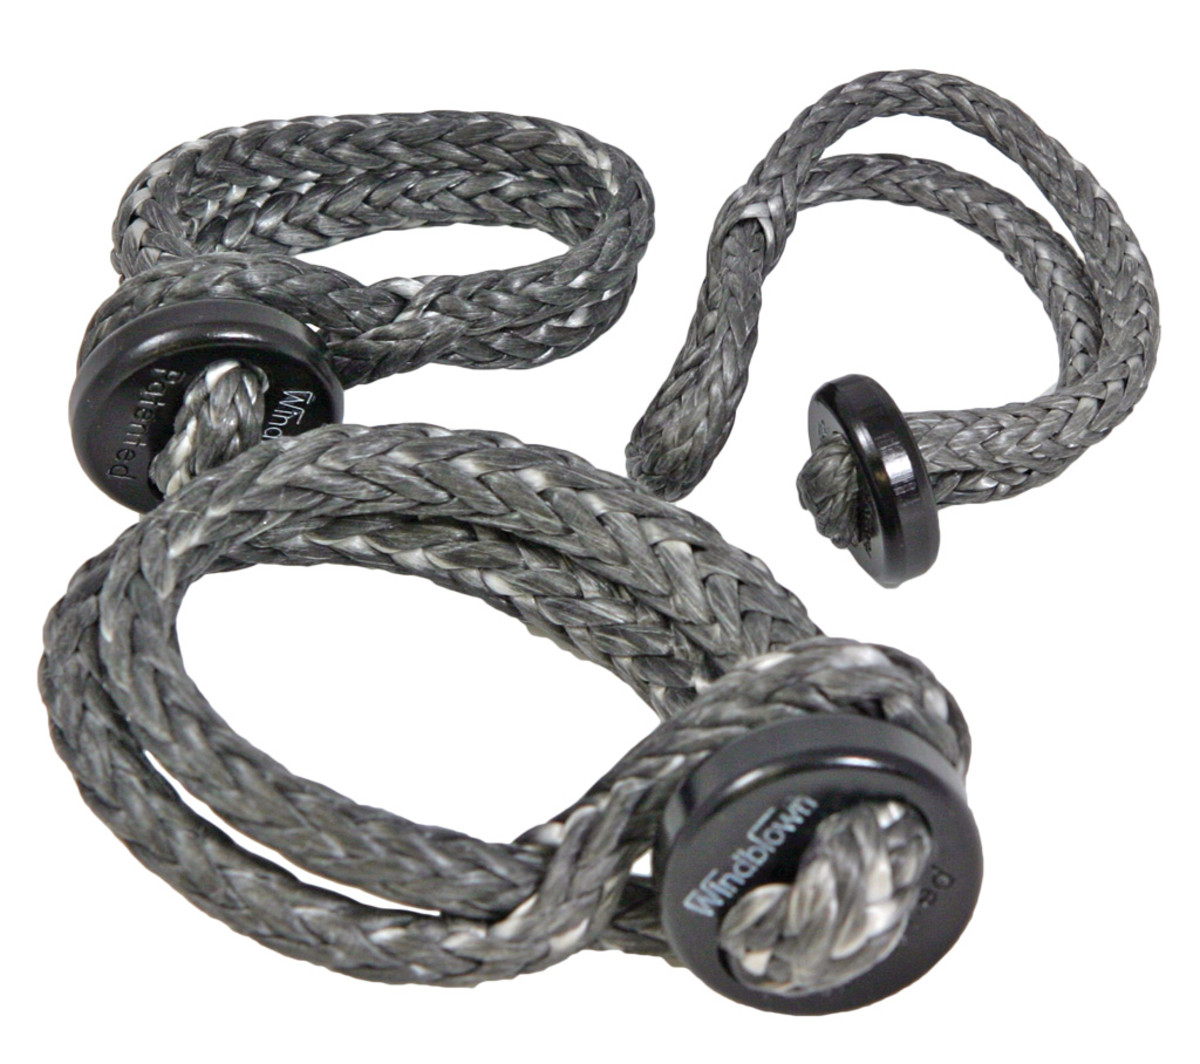 These “button” shackles from Windblown sidestep the issue of making a failproof stopper knot